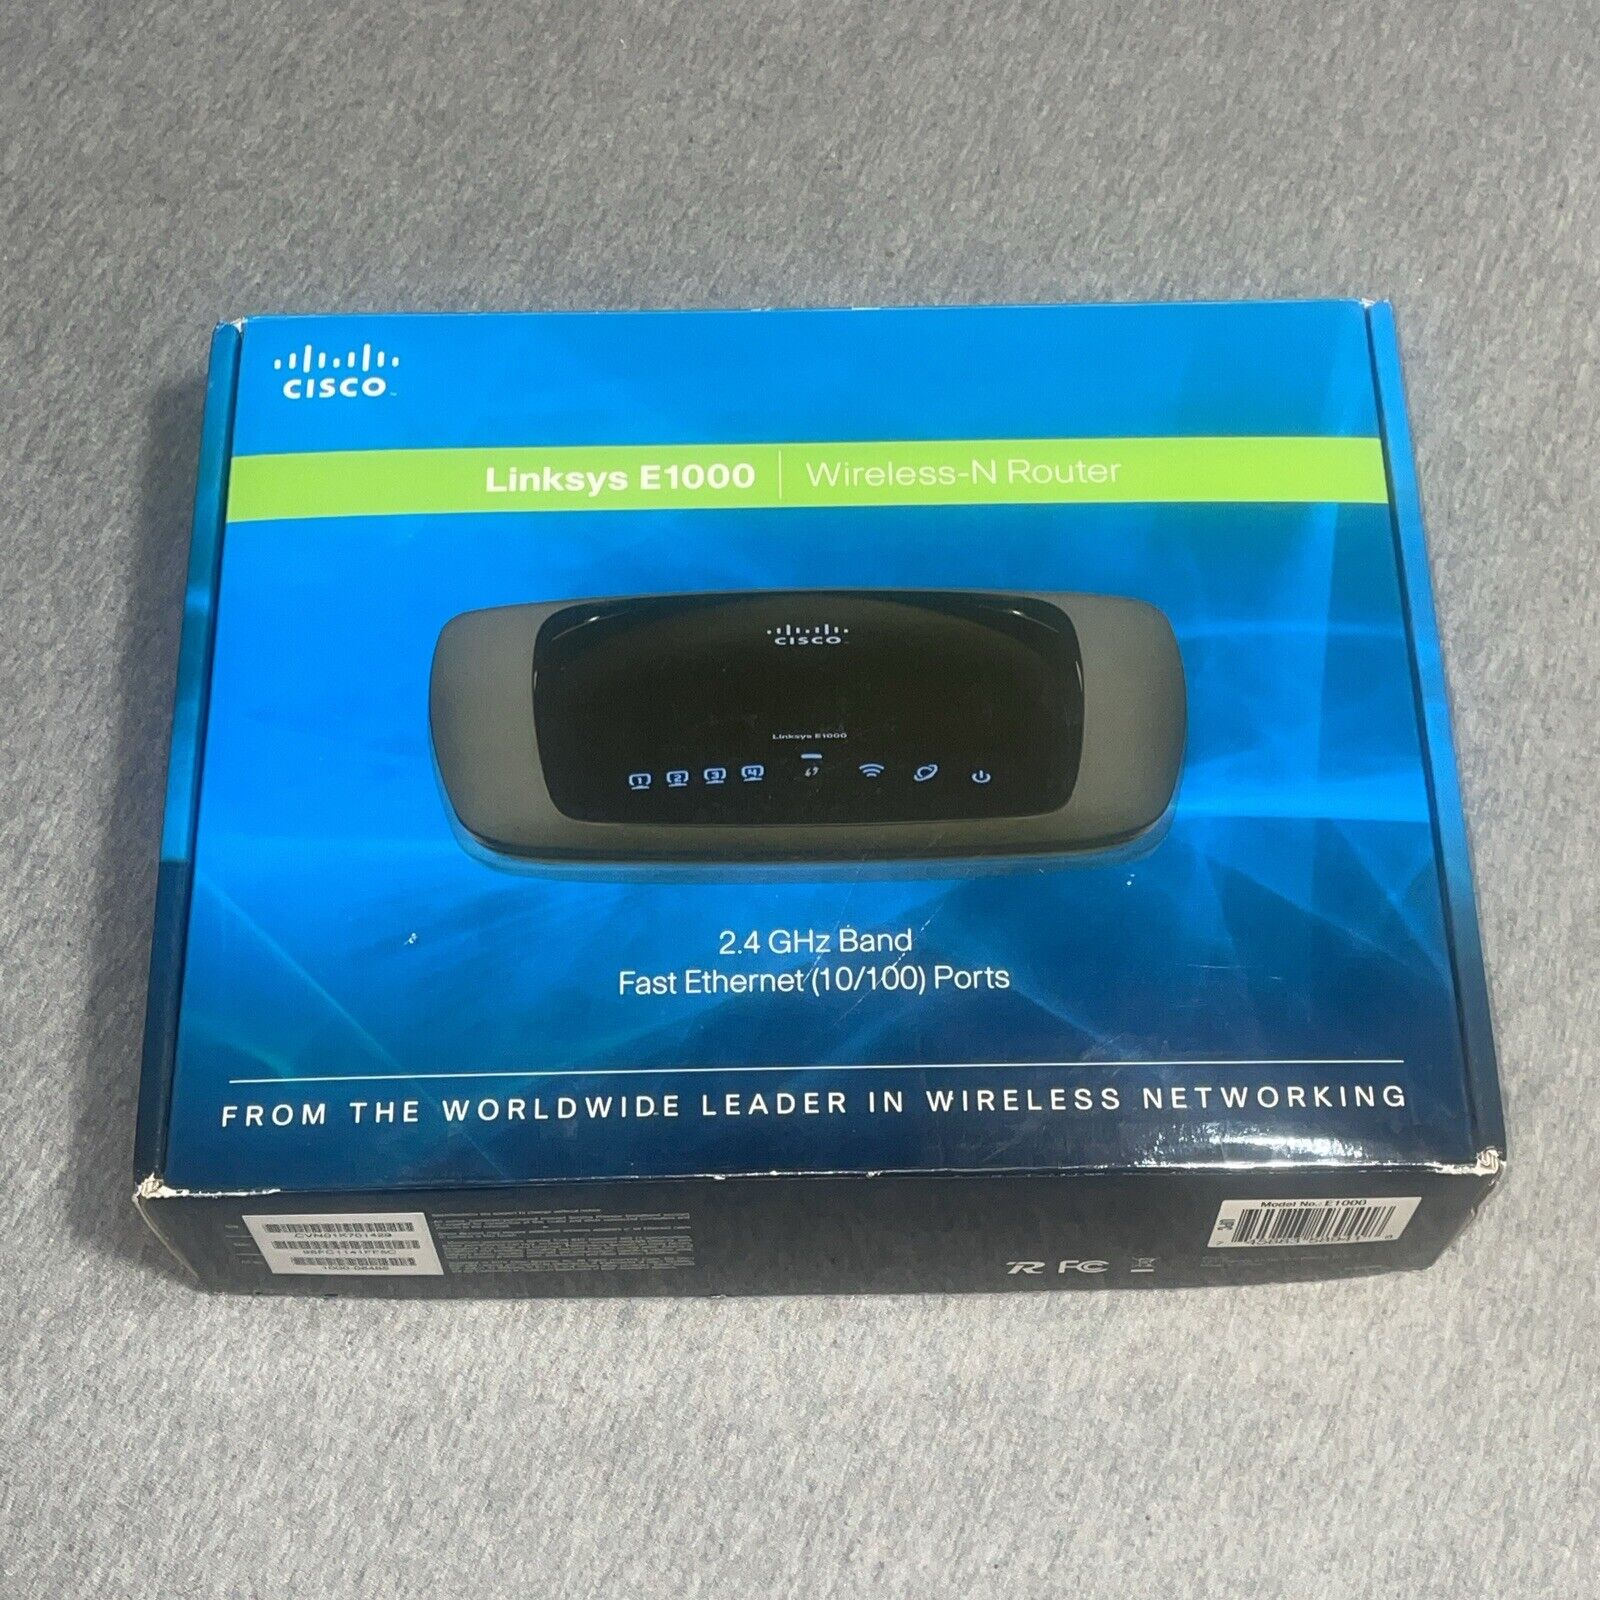 Linksys E1000 300 Mbps 4-Port 10/100 Wireless N Router